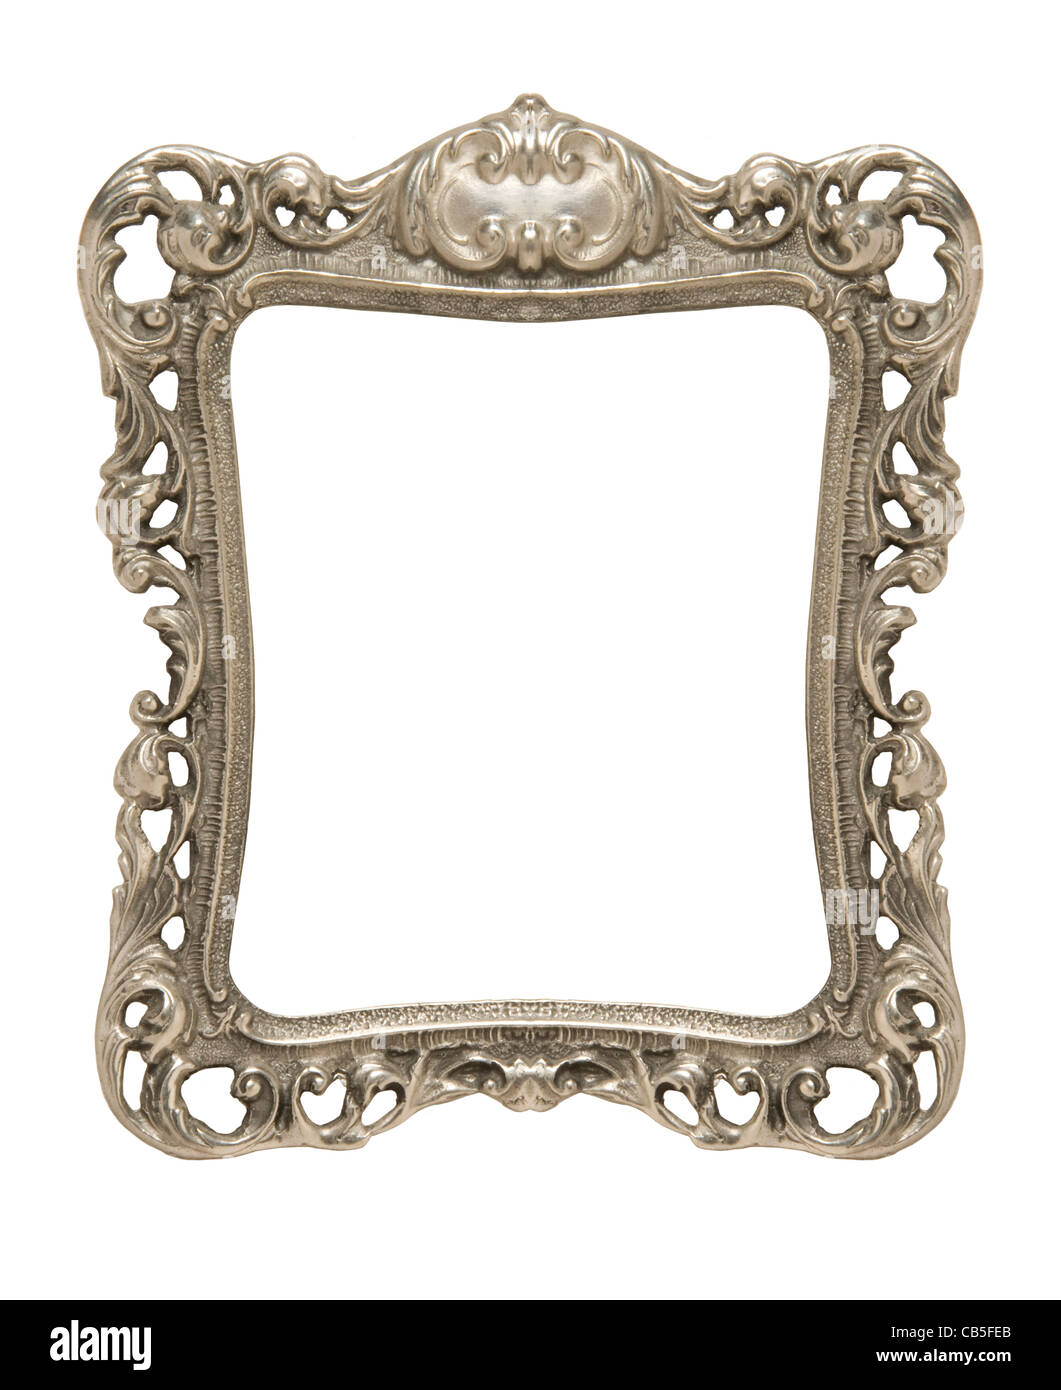 An ornate pewter picture frame silhouetted against a white background Stock Photo